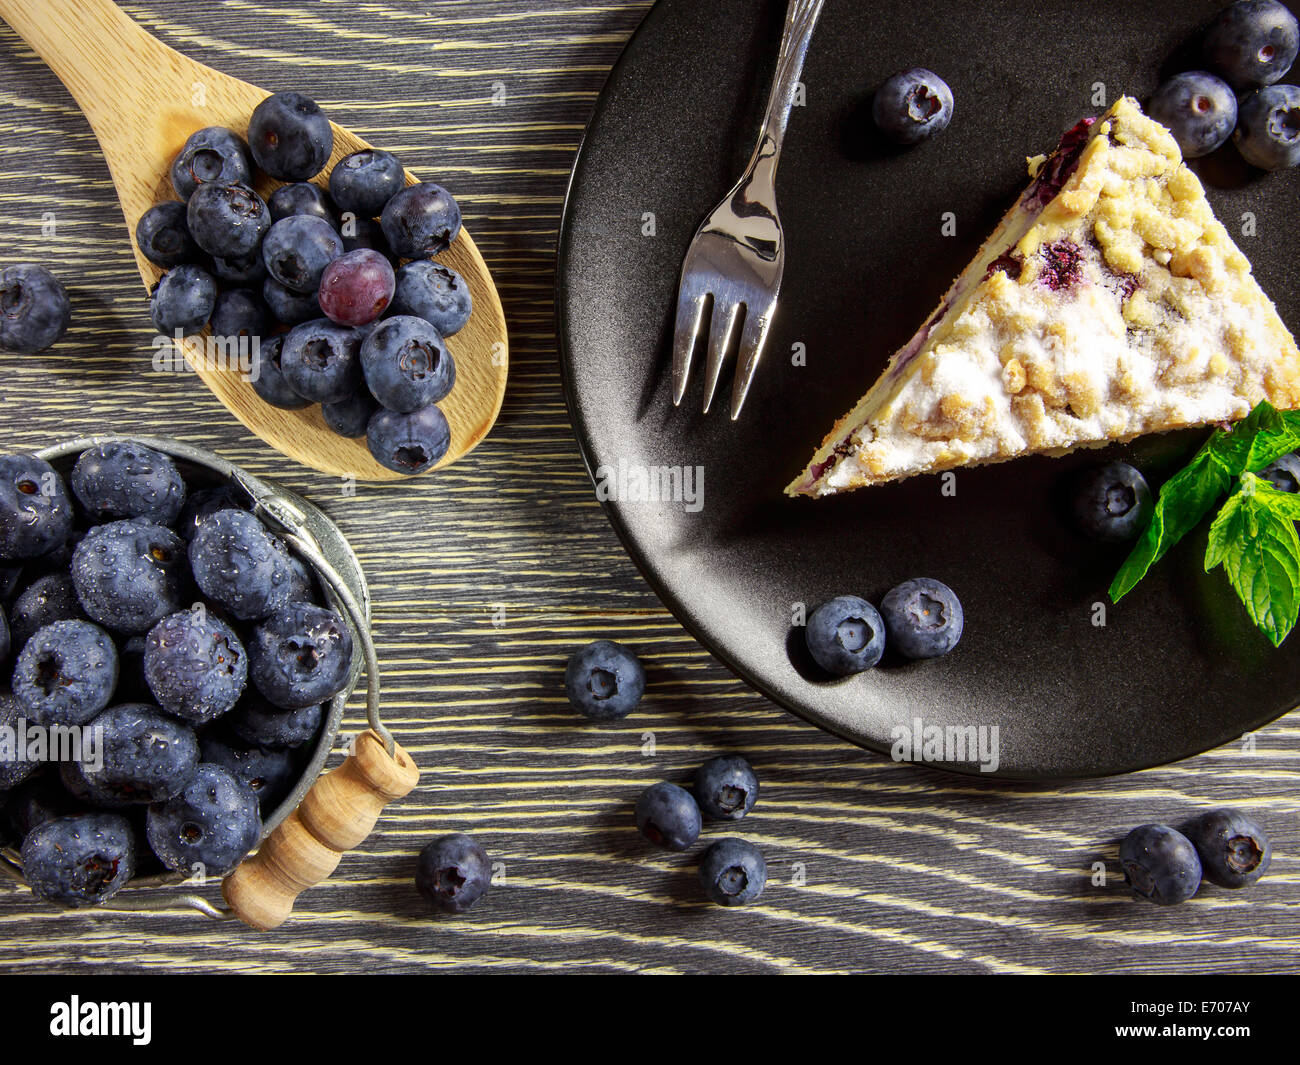 Blueberry cake and fresh fruits arranged on a wooden table Stock Photo